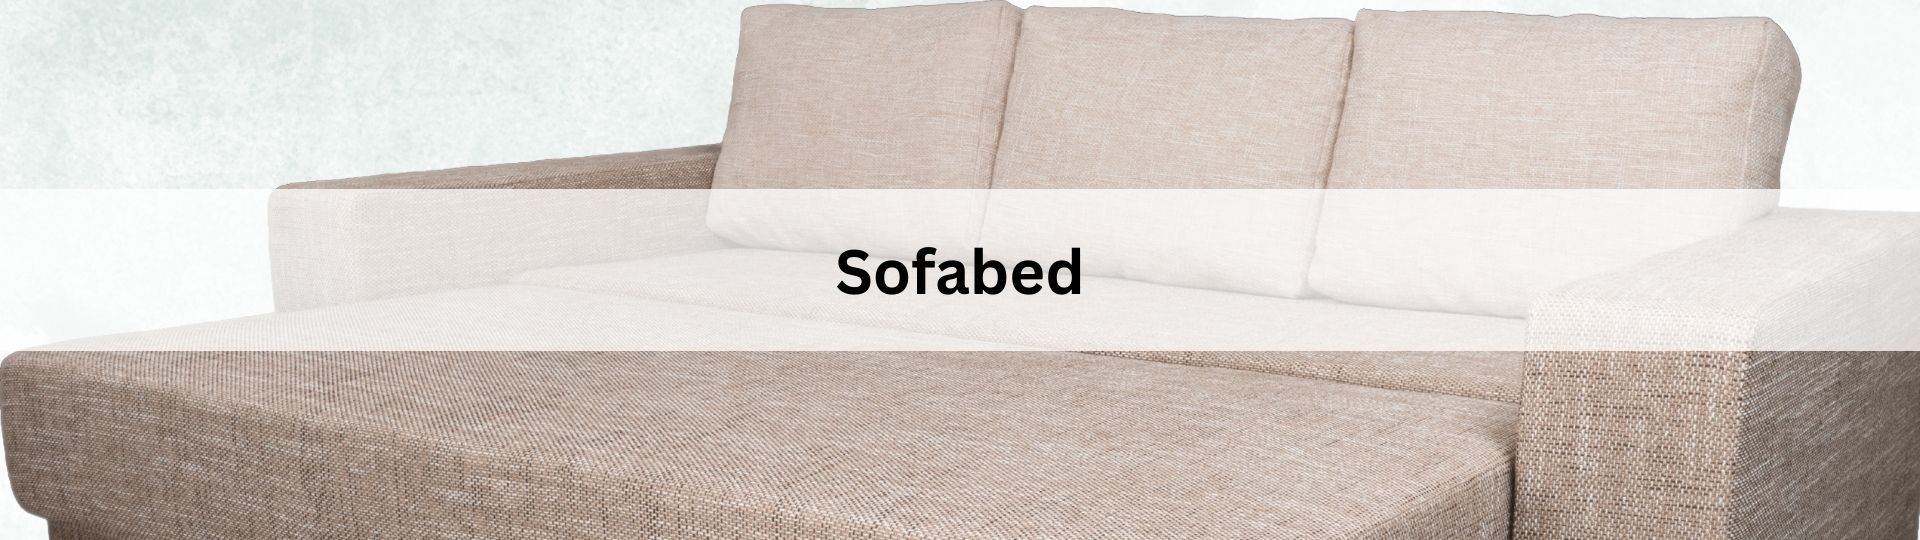 SOFA BED COLLECTIONS